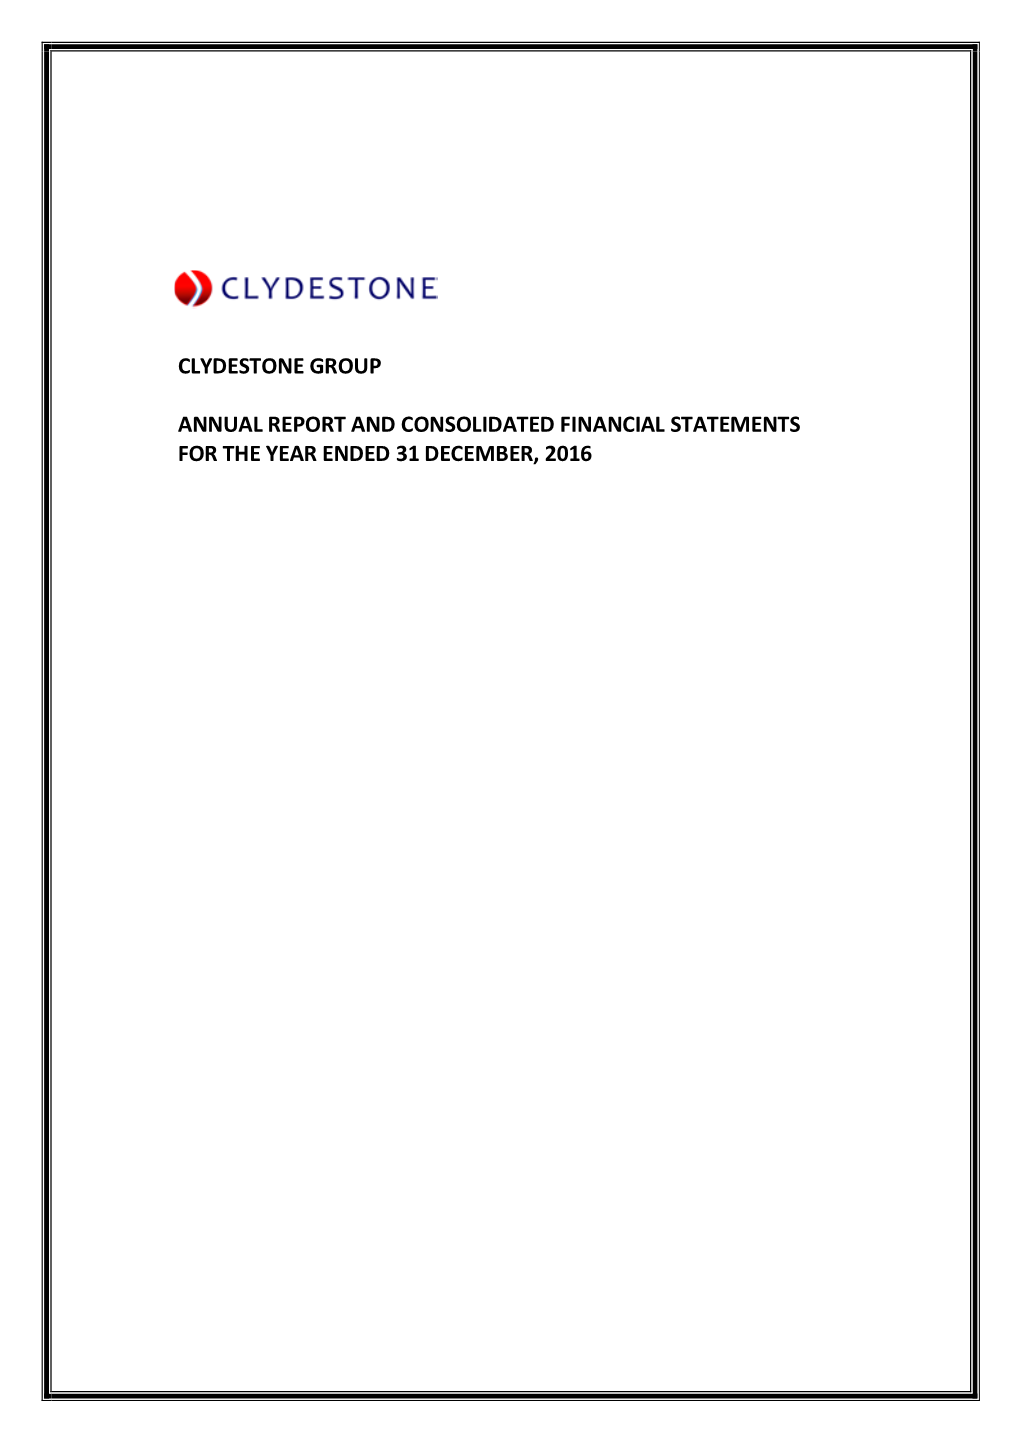 Clydestone Group Annual Report and Consolidated Financial Statements